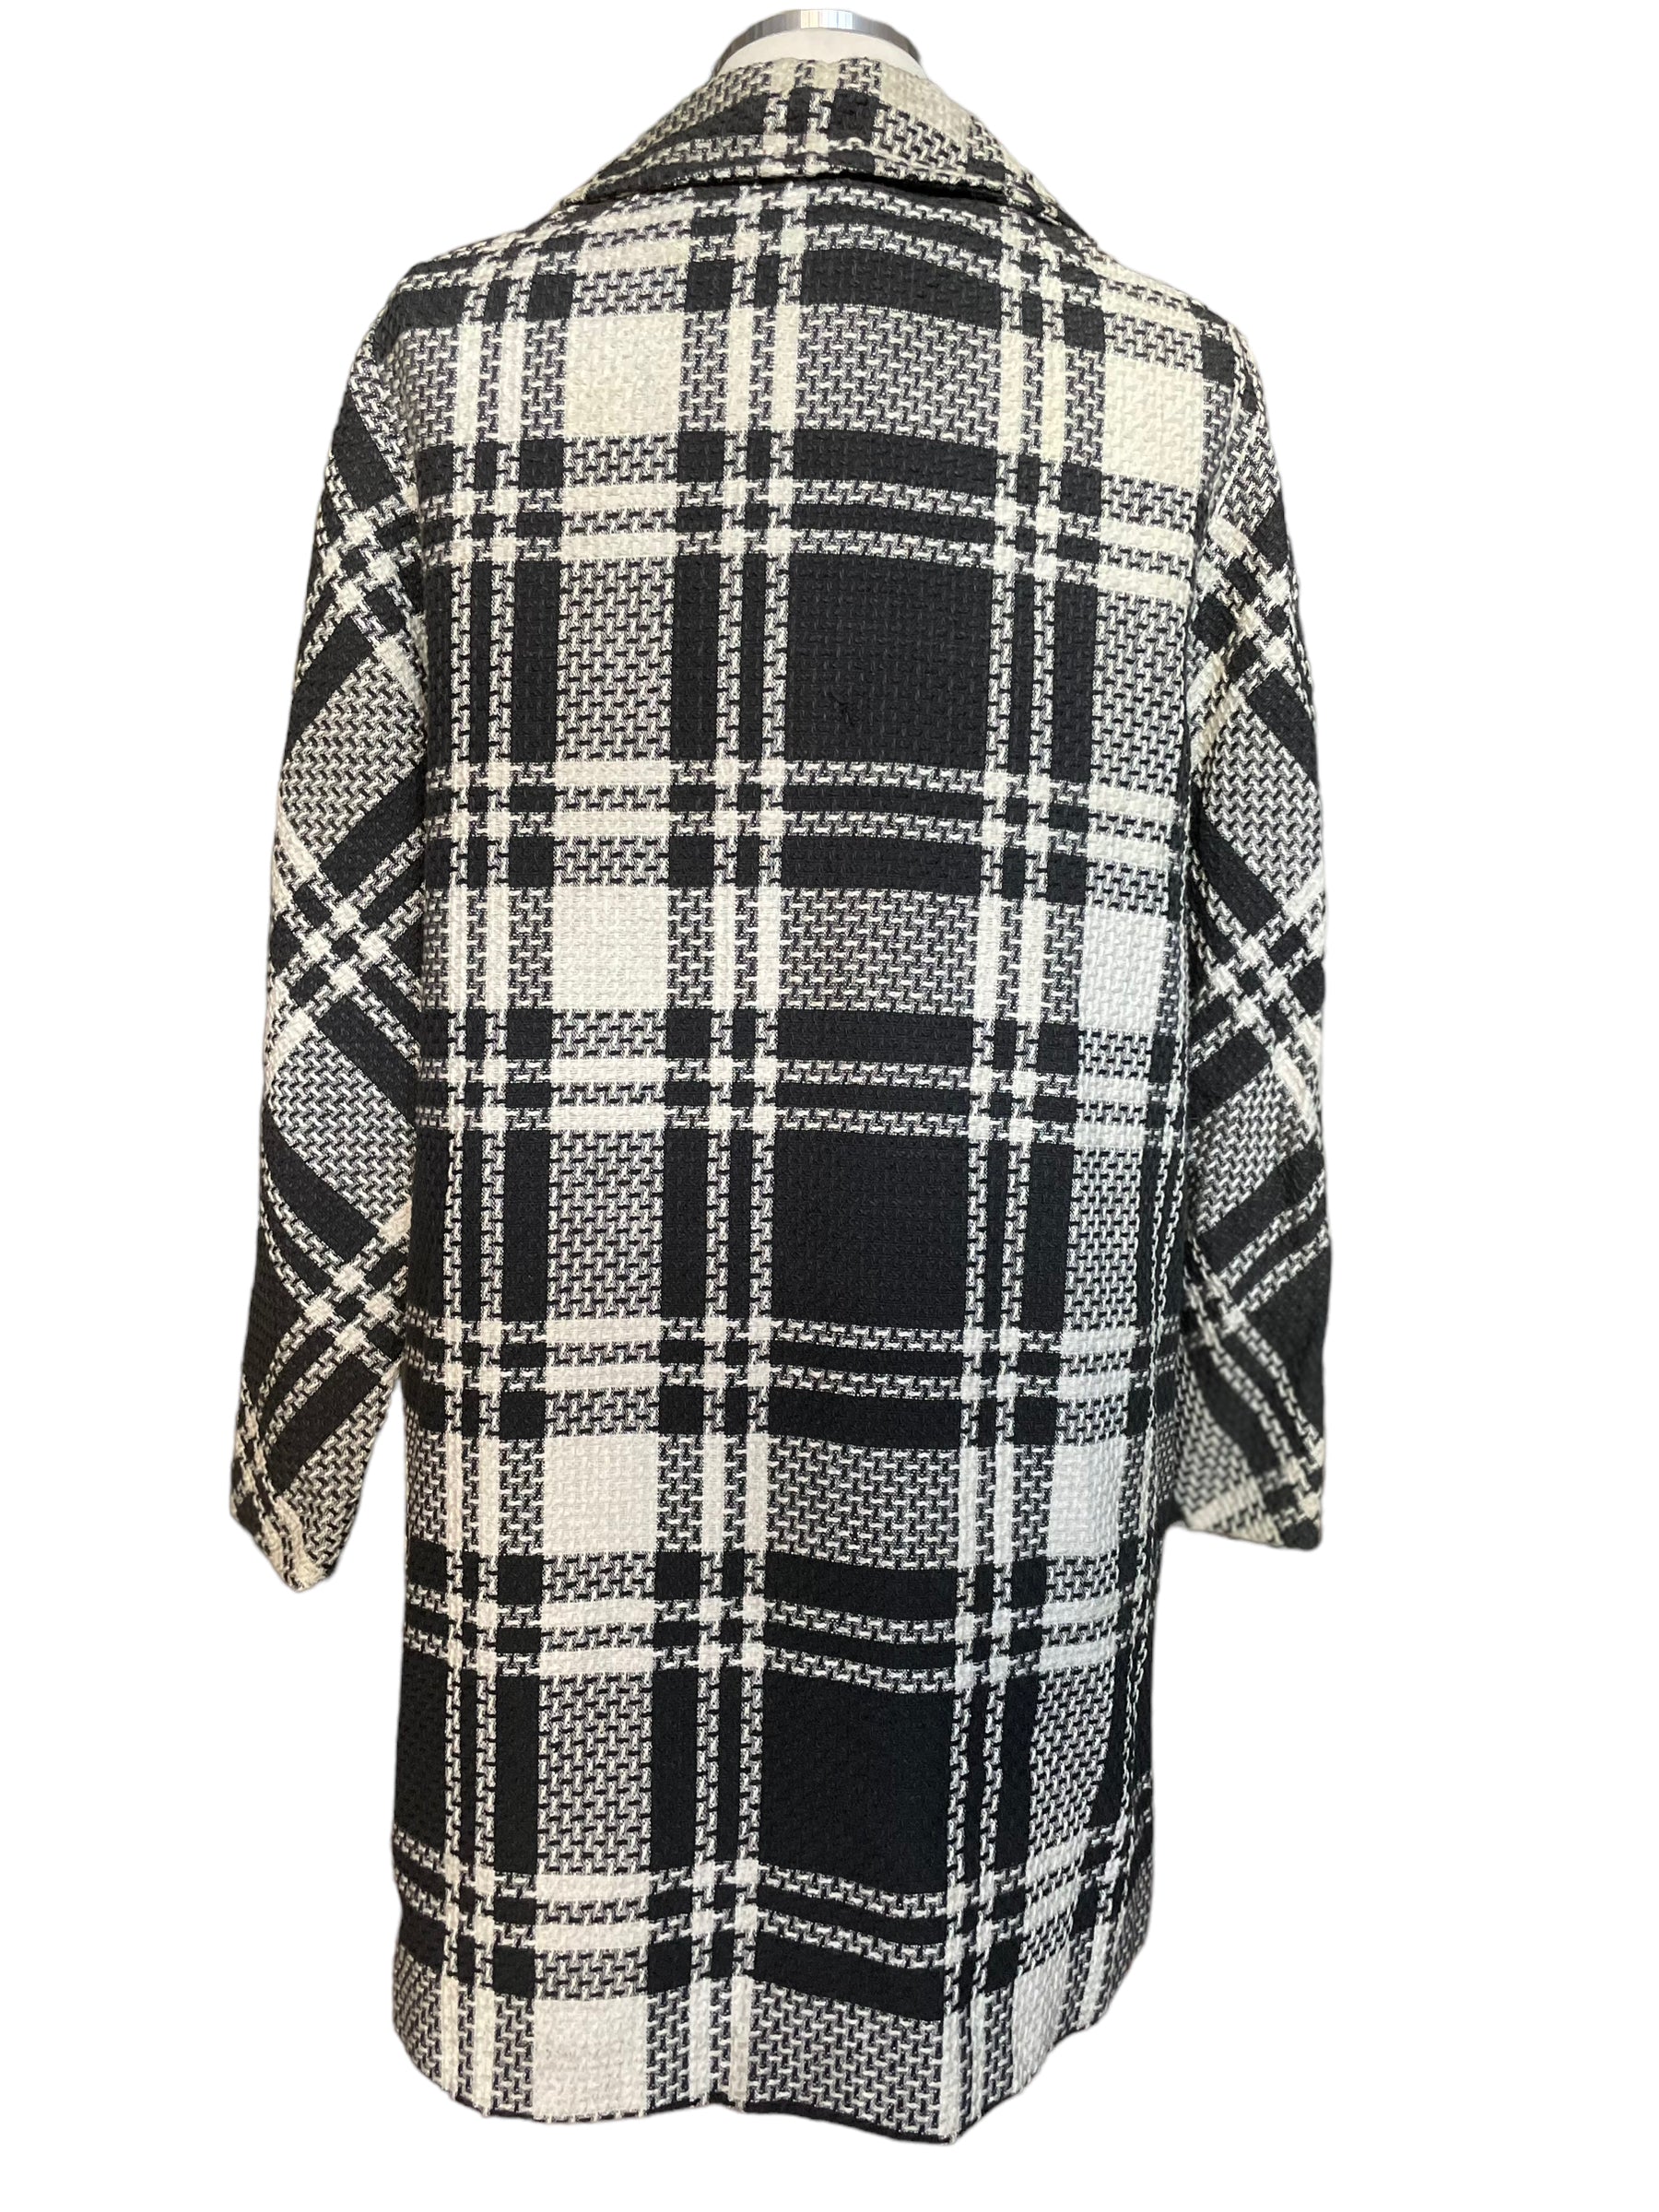 Full back view of Vintage 1960s Black and White Plaid Coat | Barn Owl Ladies Coats | Seattle True Vintage